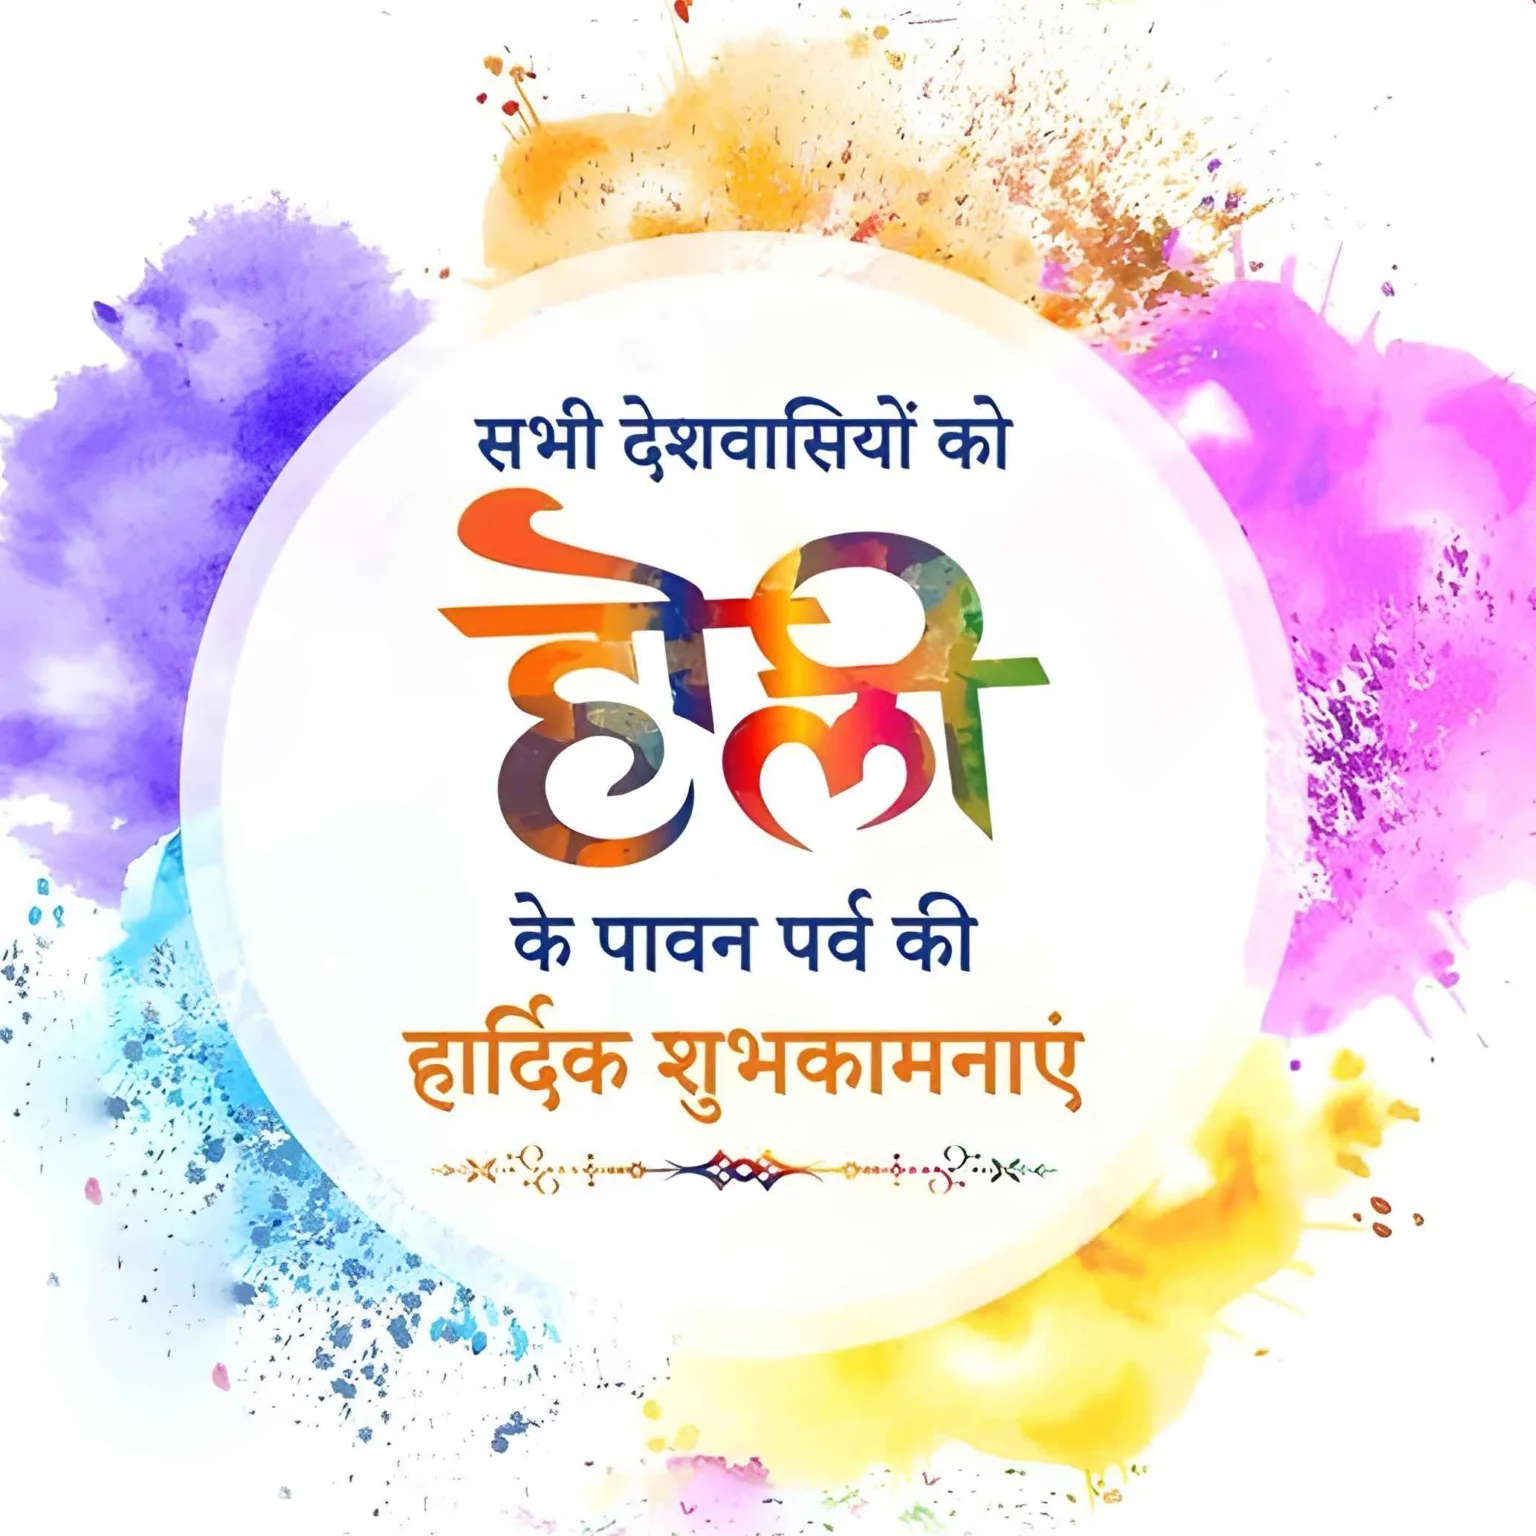 Happy Holi Wishes in Hindi Profile picture (DP)